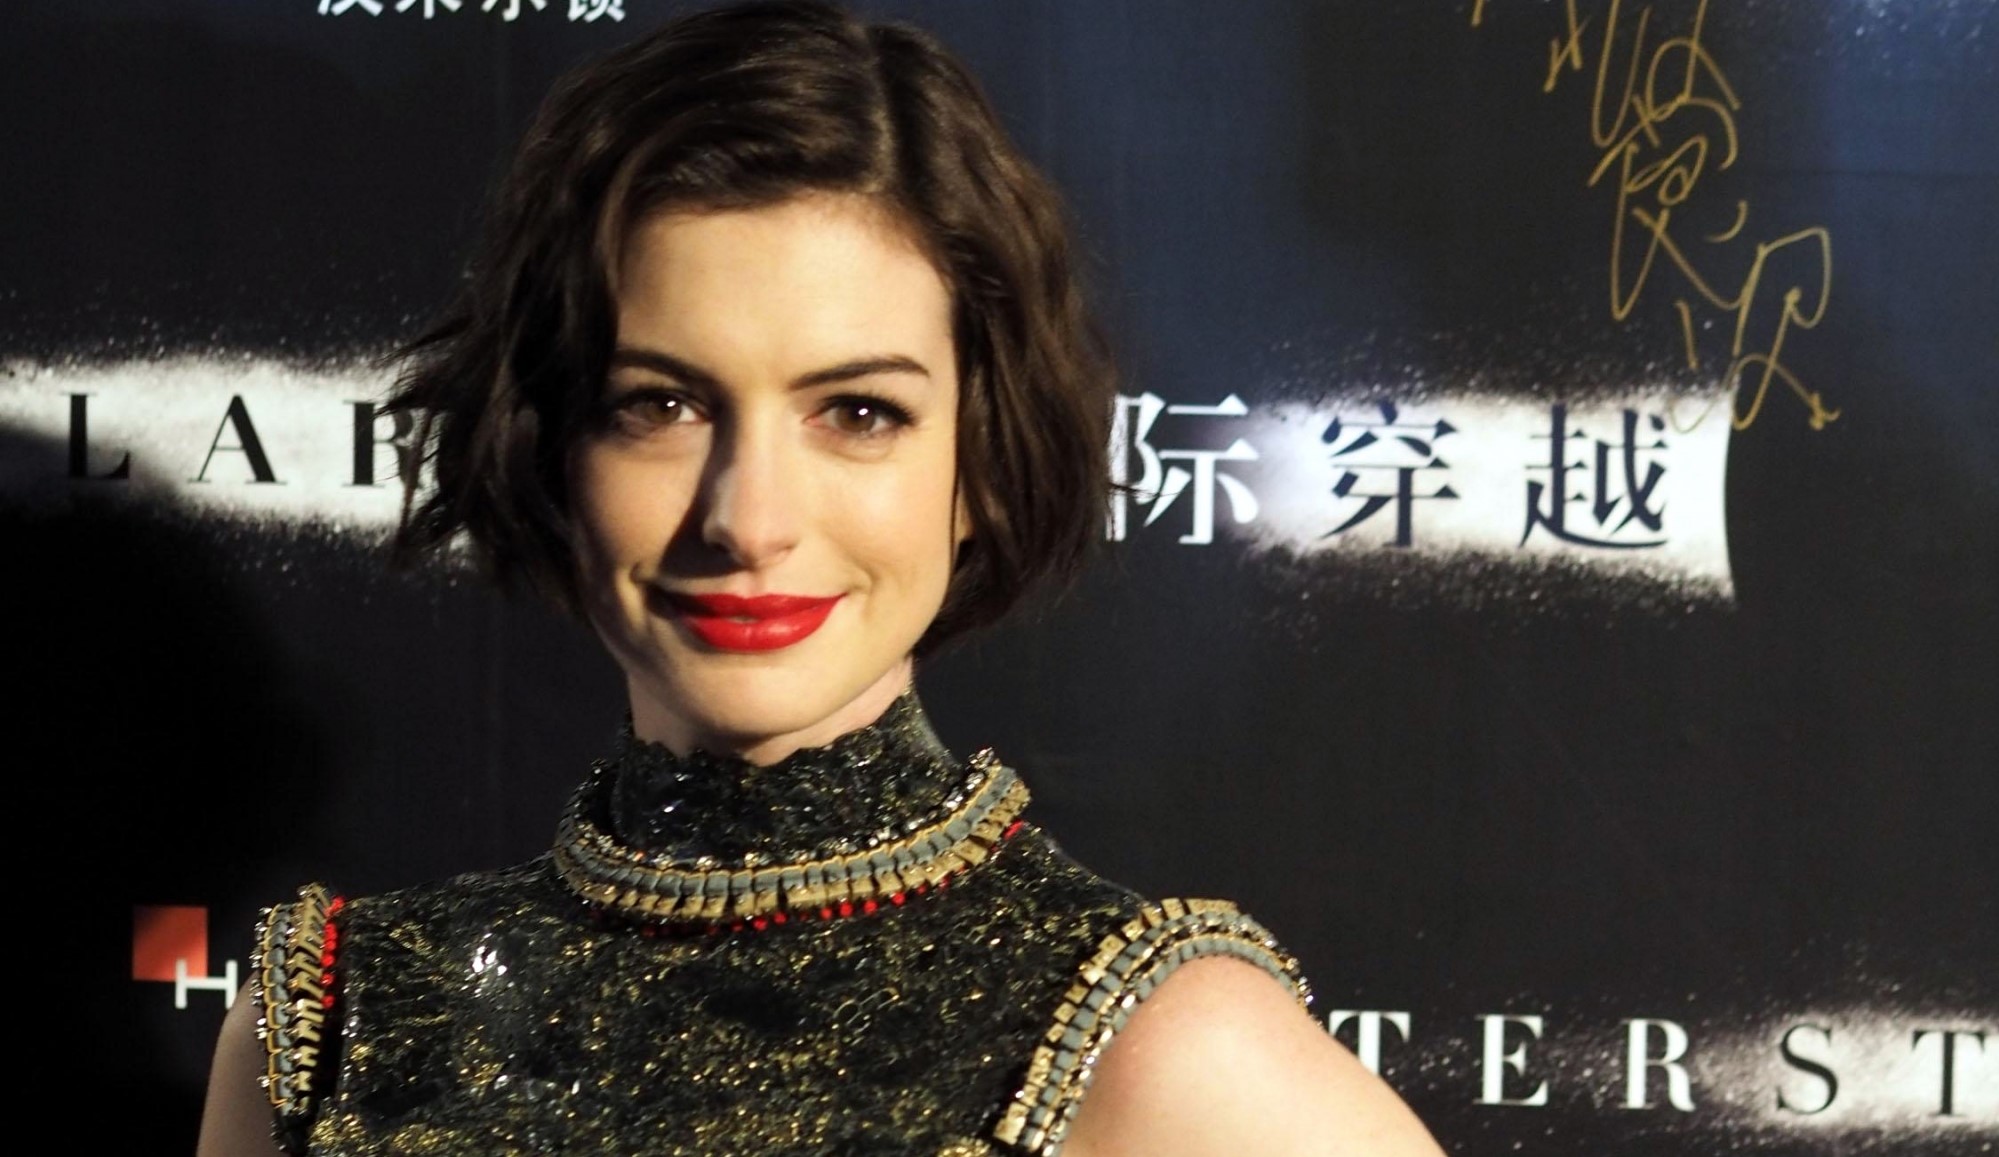 Anne Hathaway talks about her character in upcoming comedy "The Hustle"